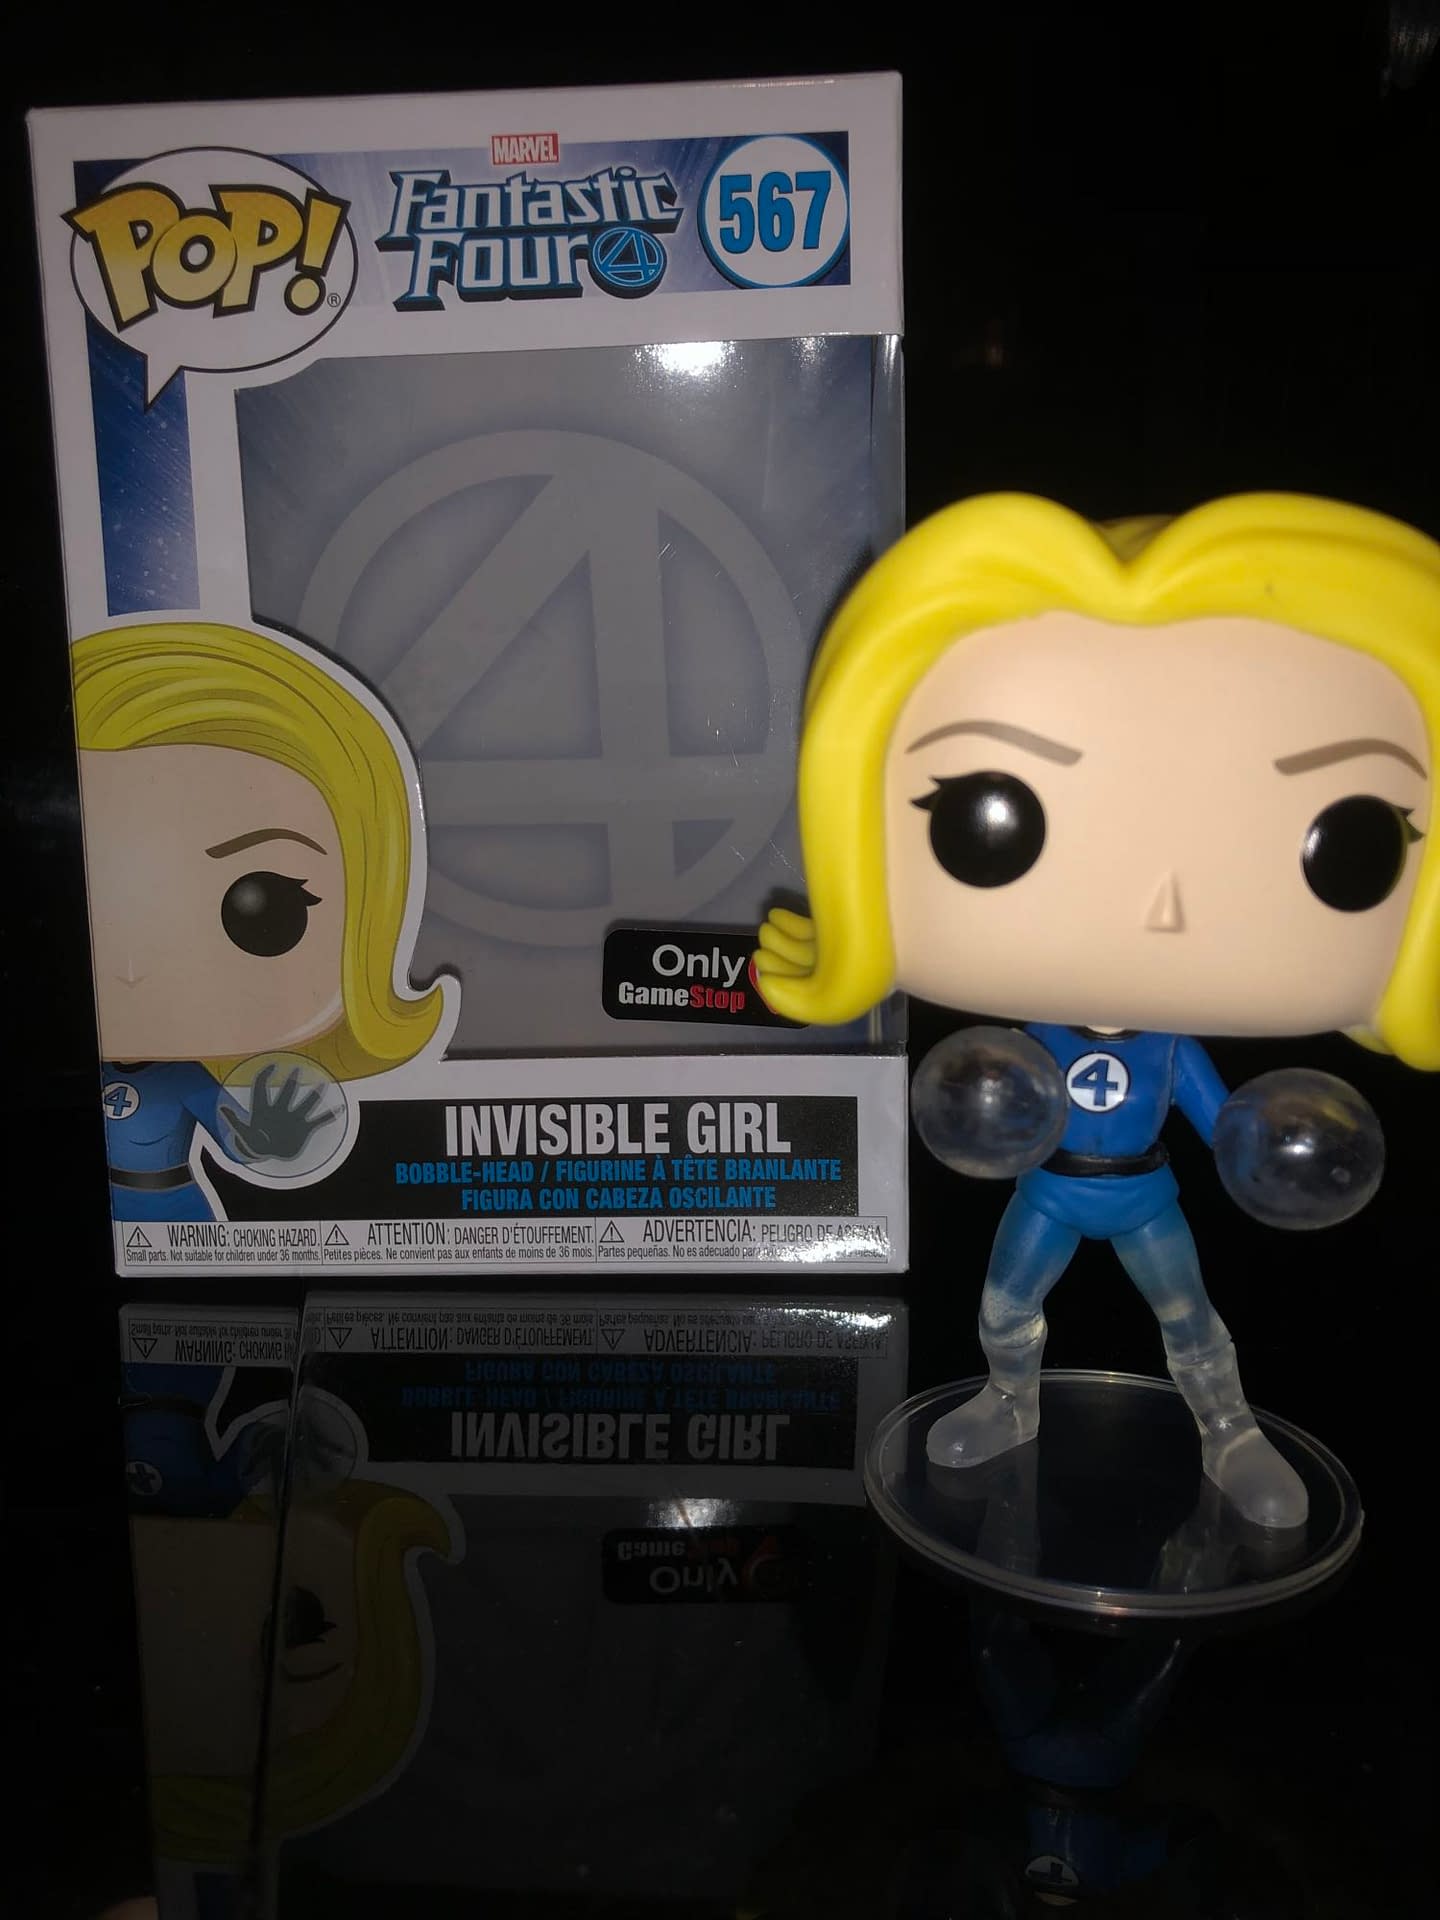 The Fantastic Four Storm Siblings Get Funko Pop Exclusives [Review]